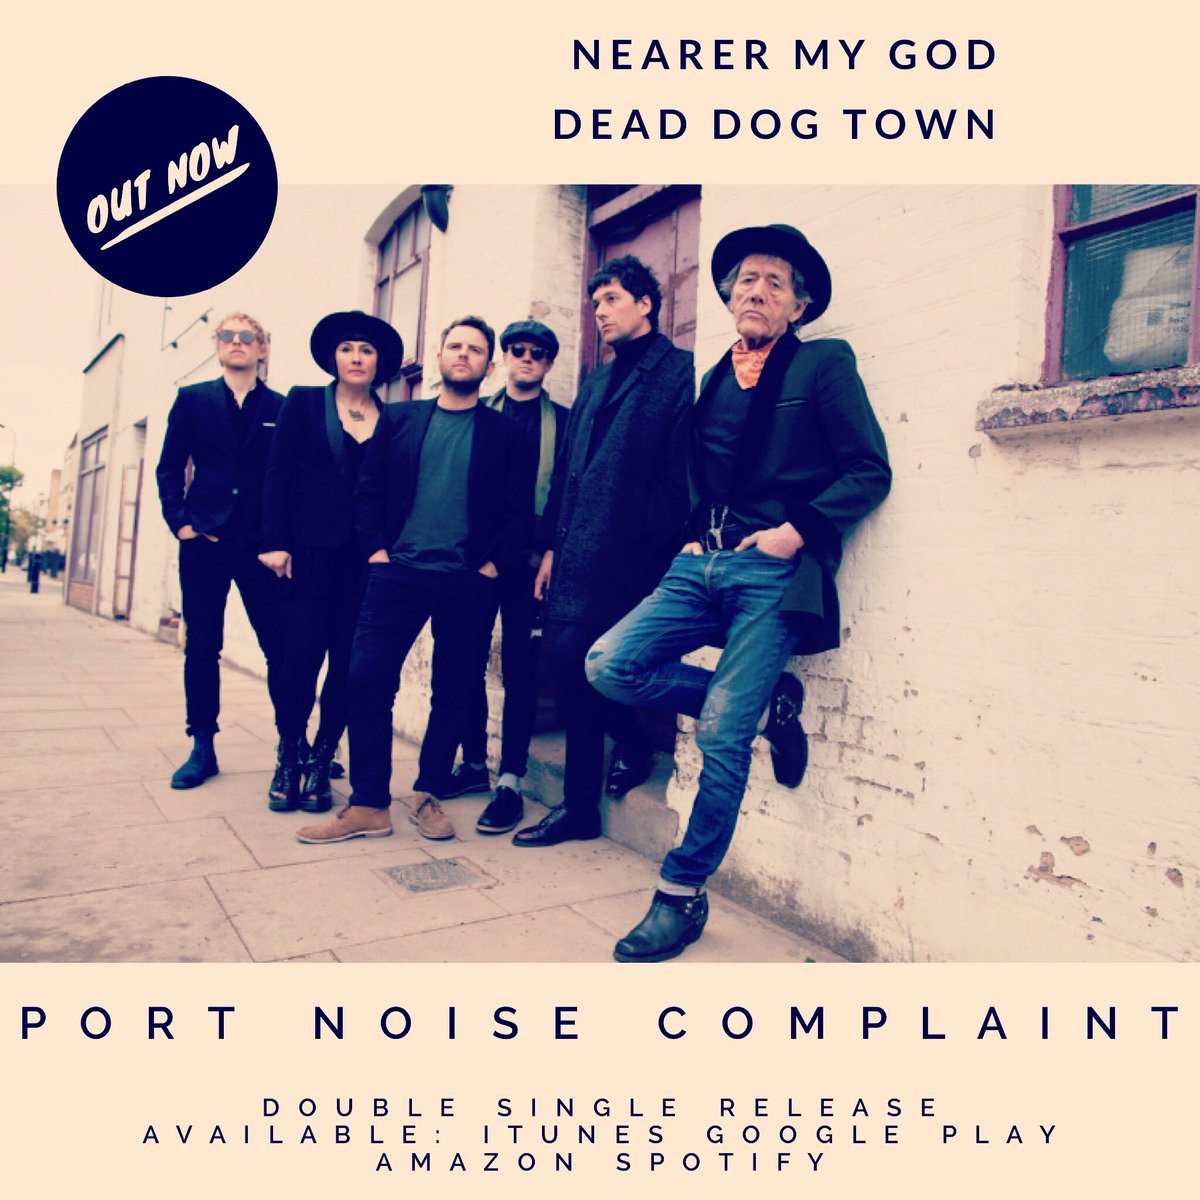 ⭐️DOUBLE SINGLE OUT NOW⭐️ The long awaited double A side from Port Noise Complaint has dropped Nearer My God & Dead Dog Town We would love you to #follow us on @Spotify ⤵️ open.spotify.com/artist/5RO5D2w… @PortNoiseC #portnoisecomplaint #newmusic #nearermygod #deaddogtown #retweet